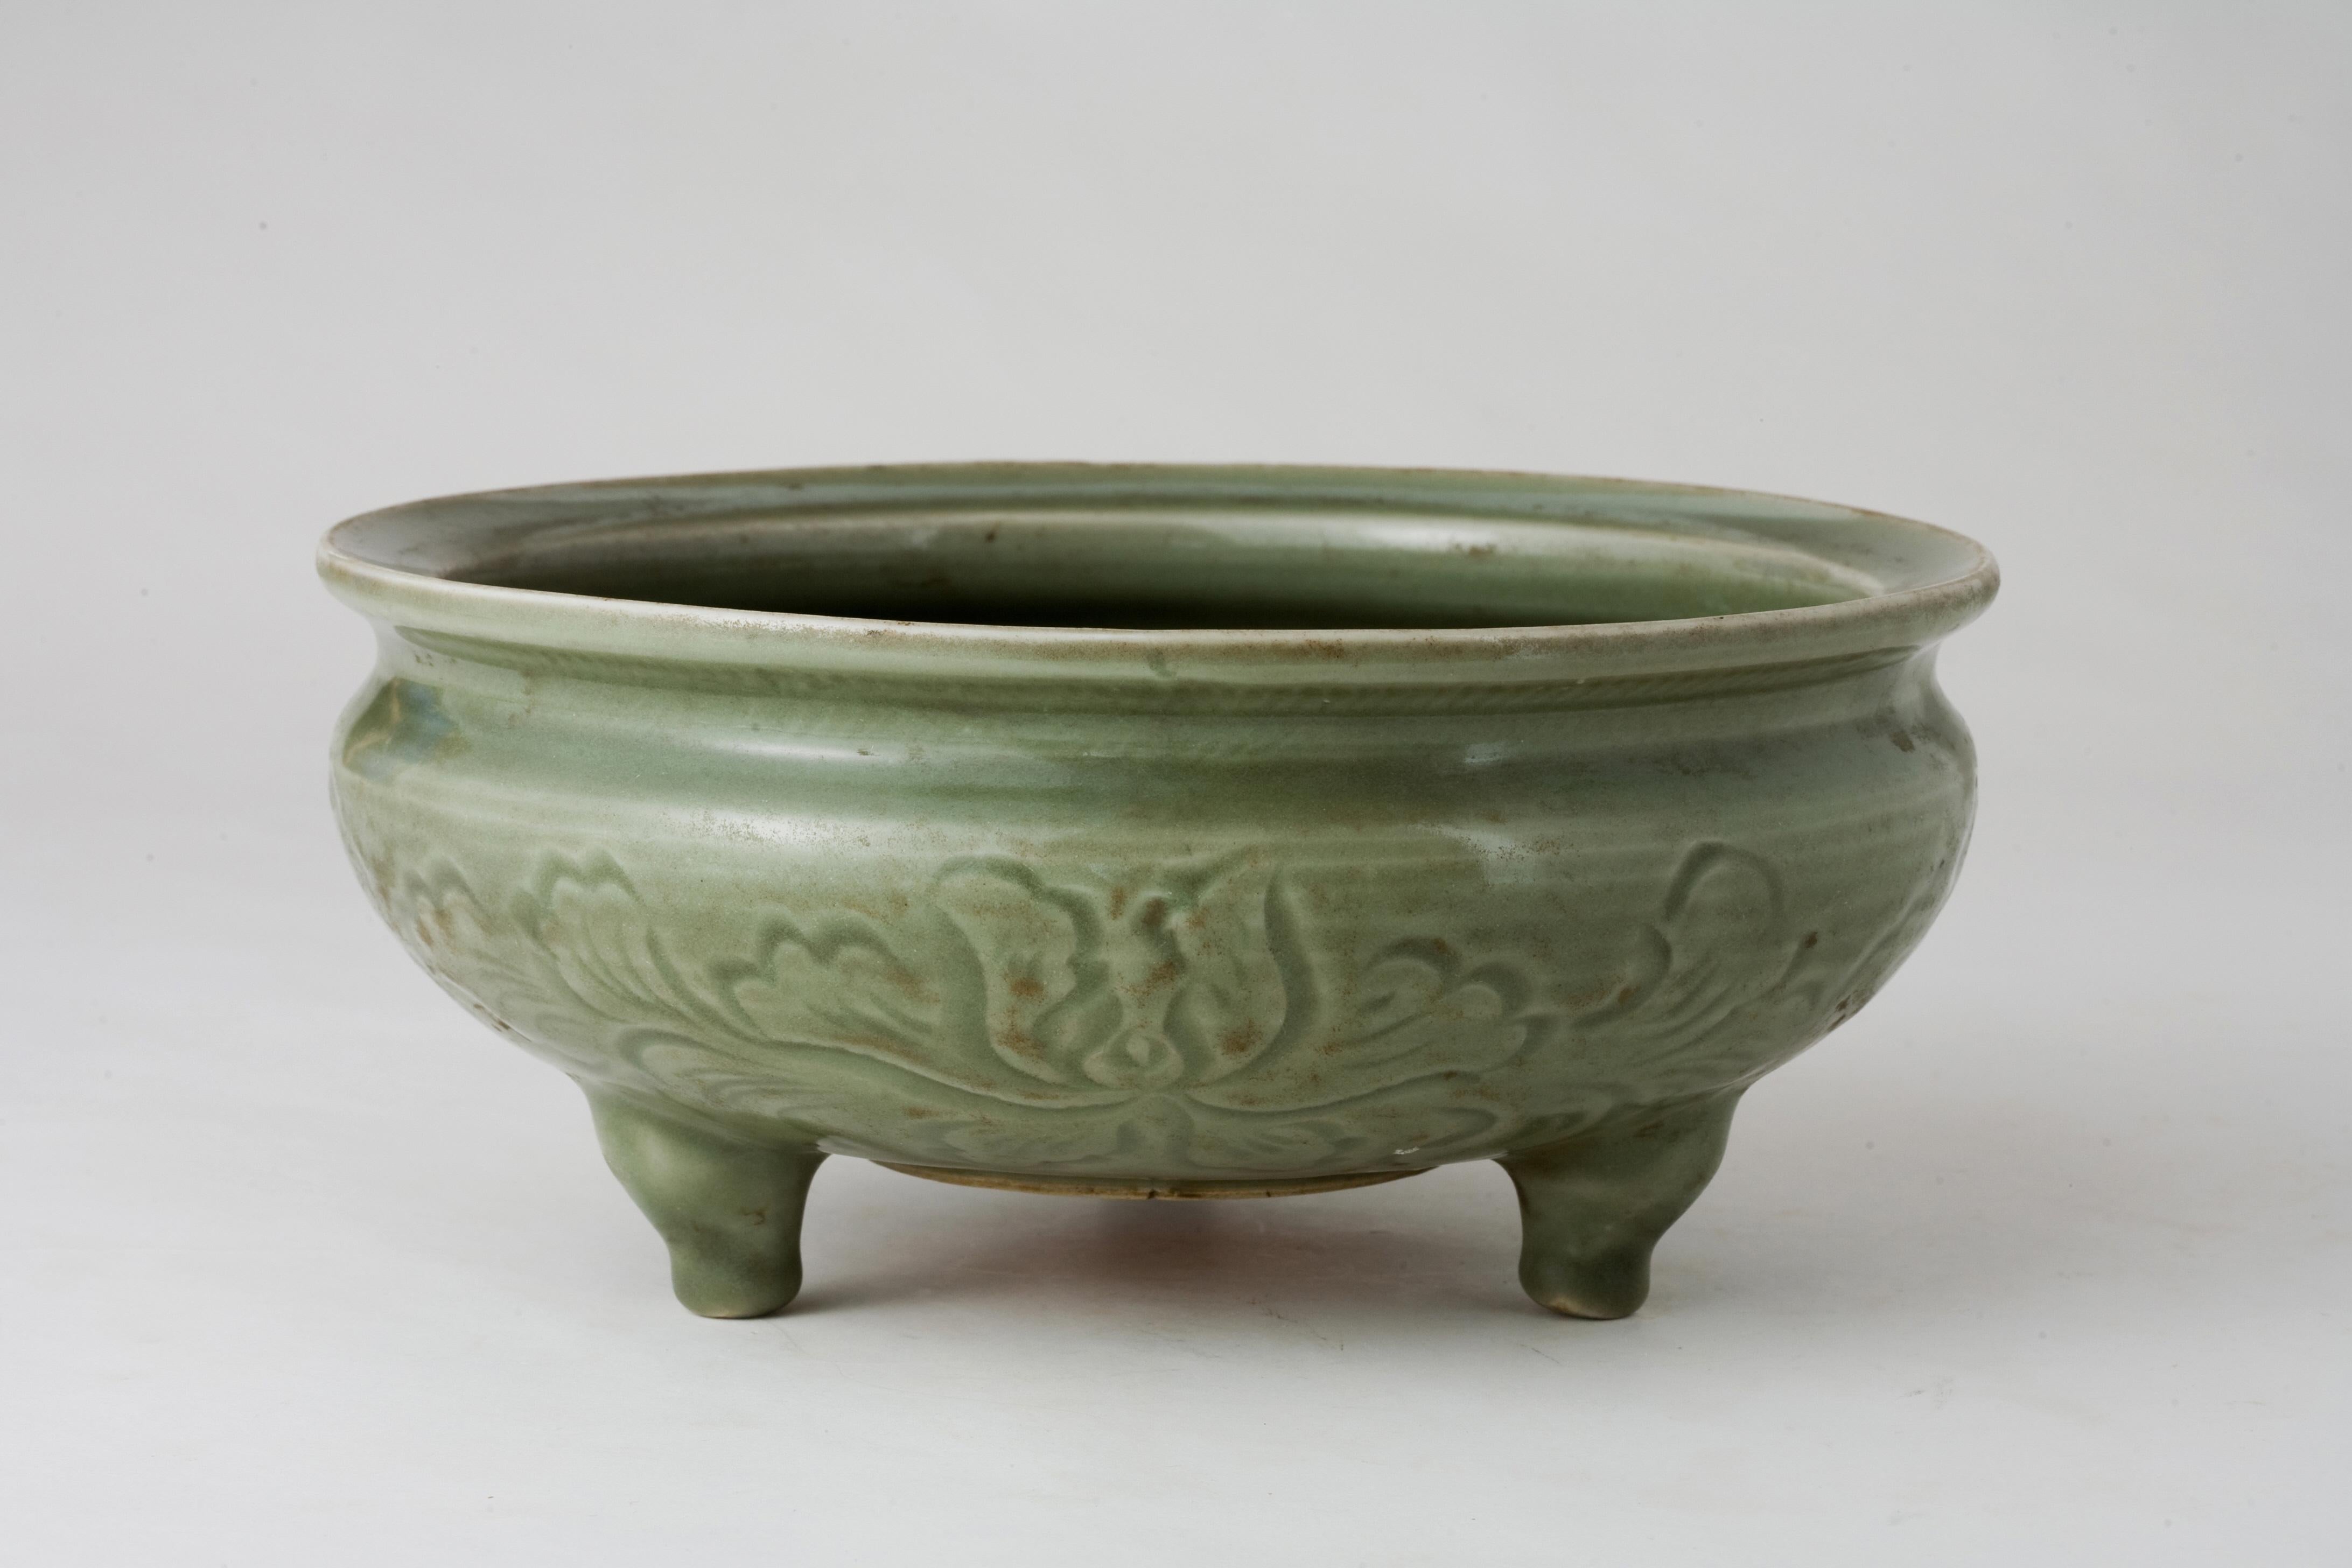 This censer is characterized by its tripod form, which means it stands on three feet. Incense burners from the Ming dynasty are often highly regarded for their craftsmanship and the quality of the glaze texture and coloration. This piece features